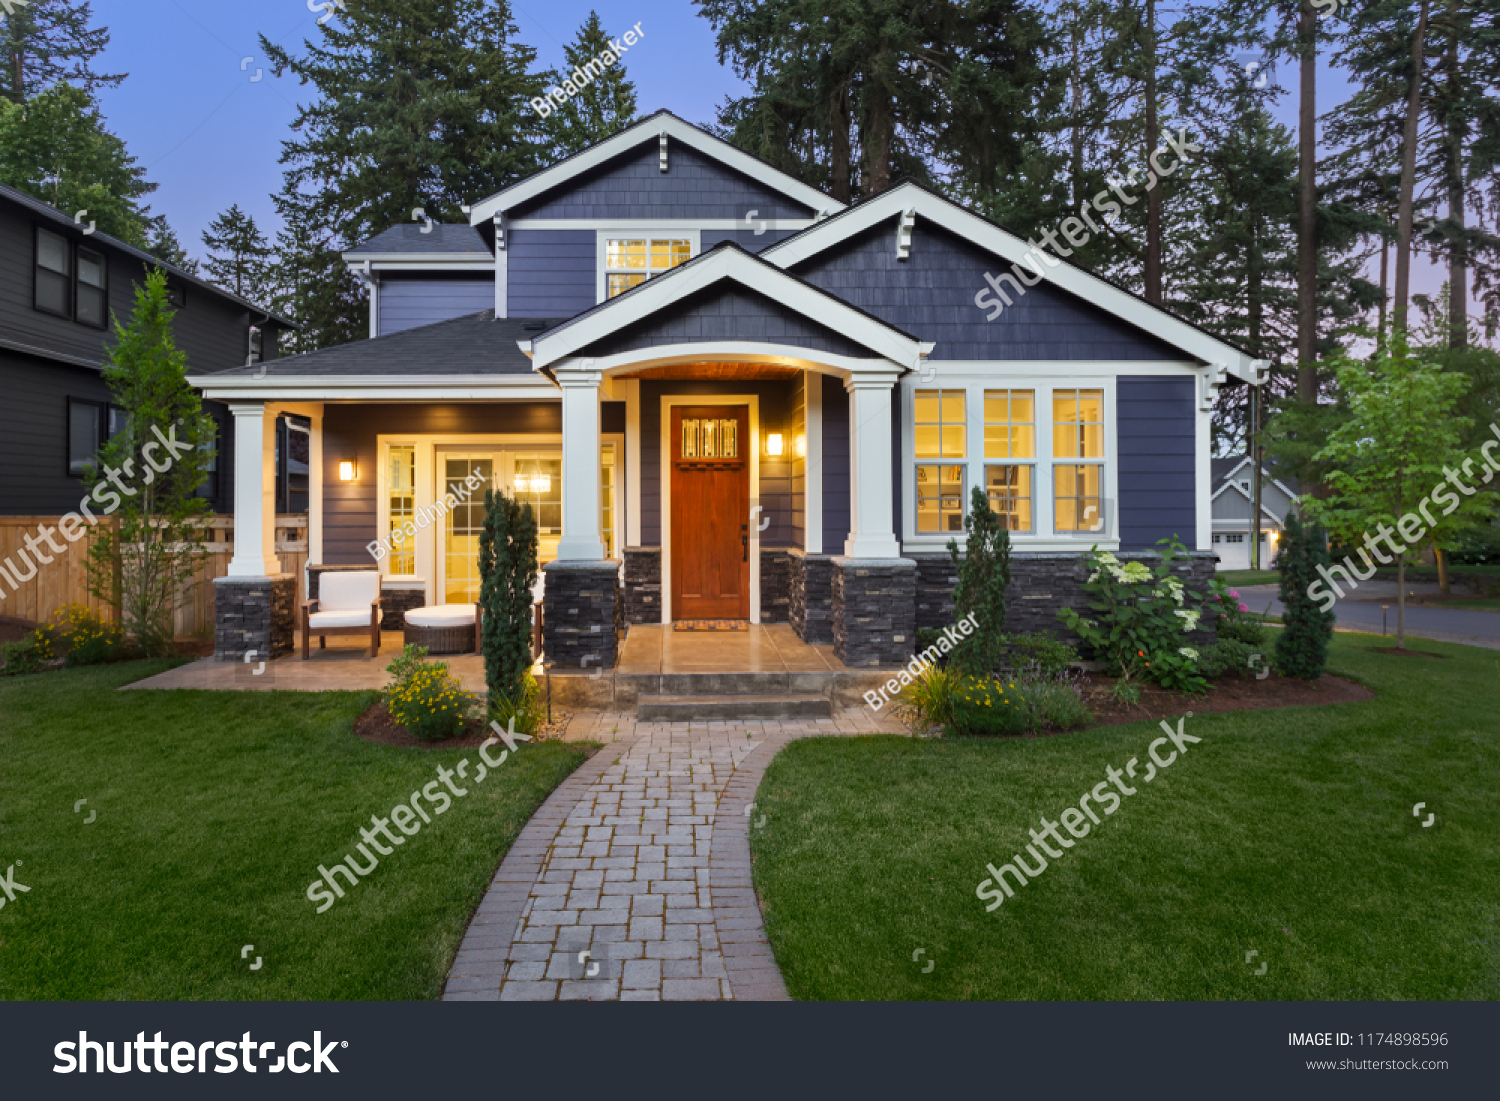 Luxury Home Exterior at Night: Beautiful New House with Green Grass and Landscaping at Twilight.Has Covered Porch and Glowing Interior Lights.  #1174898596